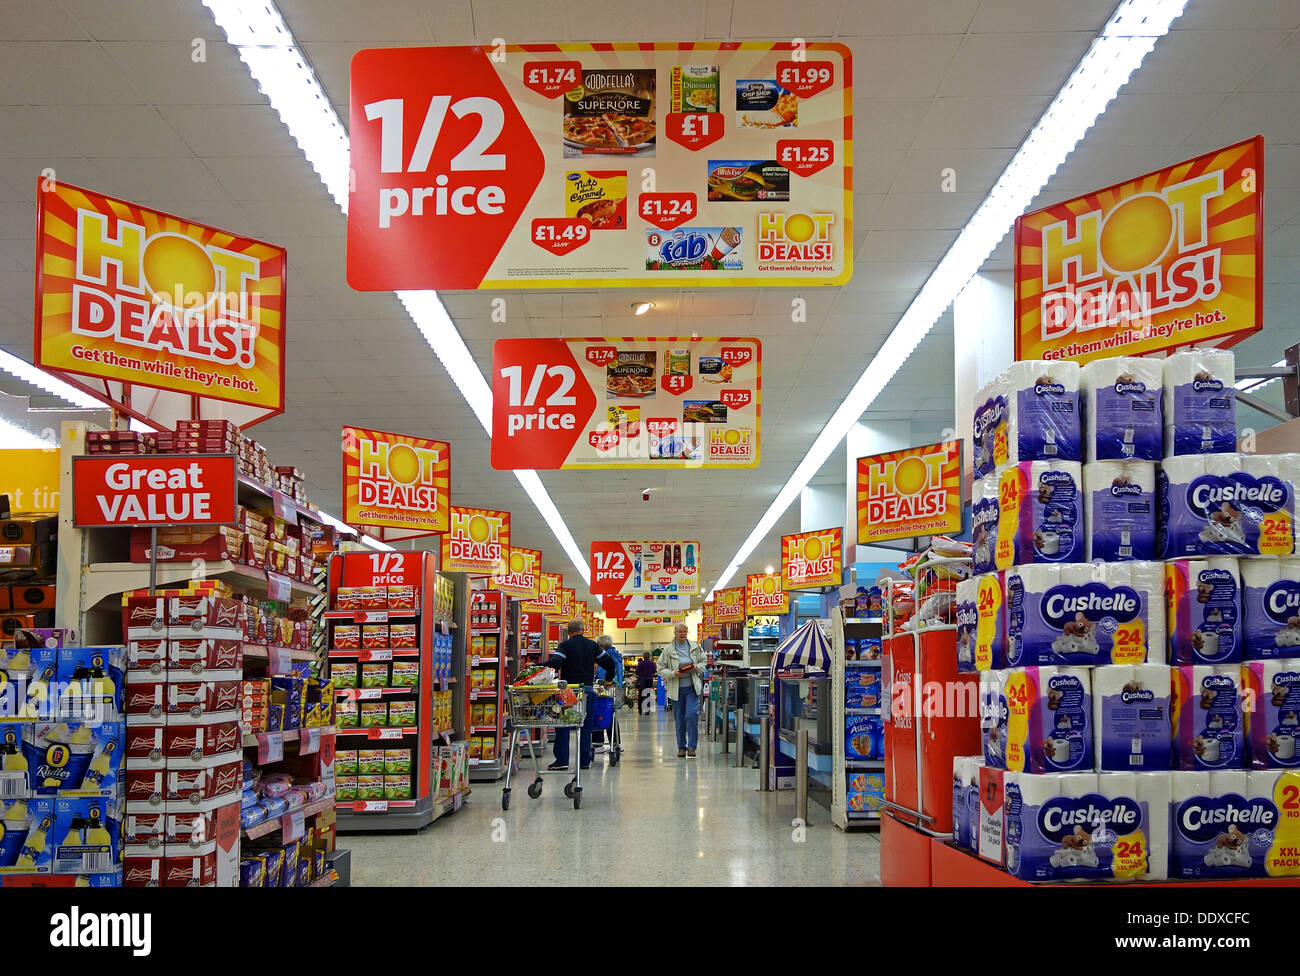 Offers and deals signs in a Morrisons supermarket Stock Photo